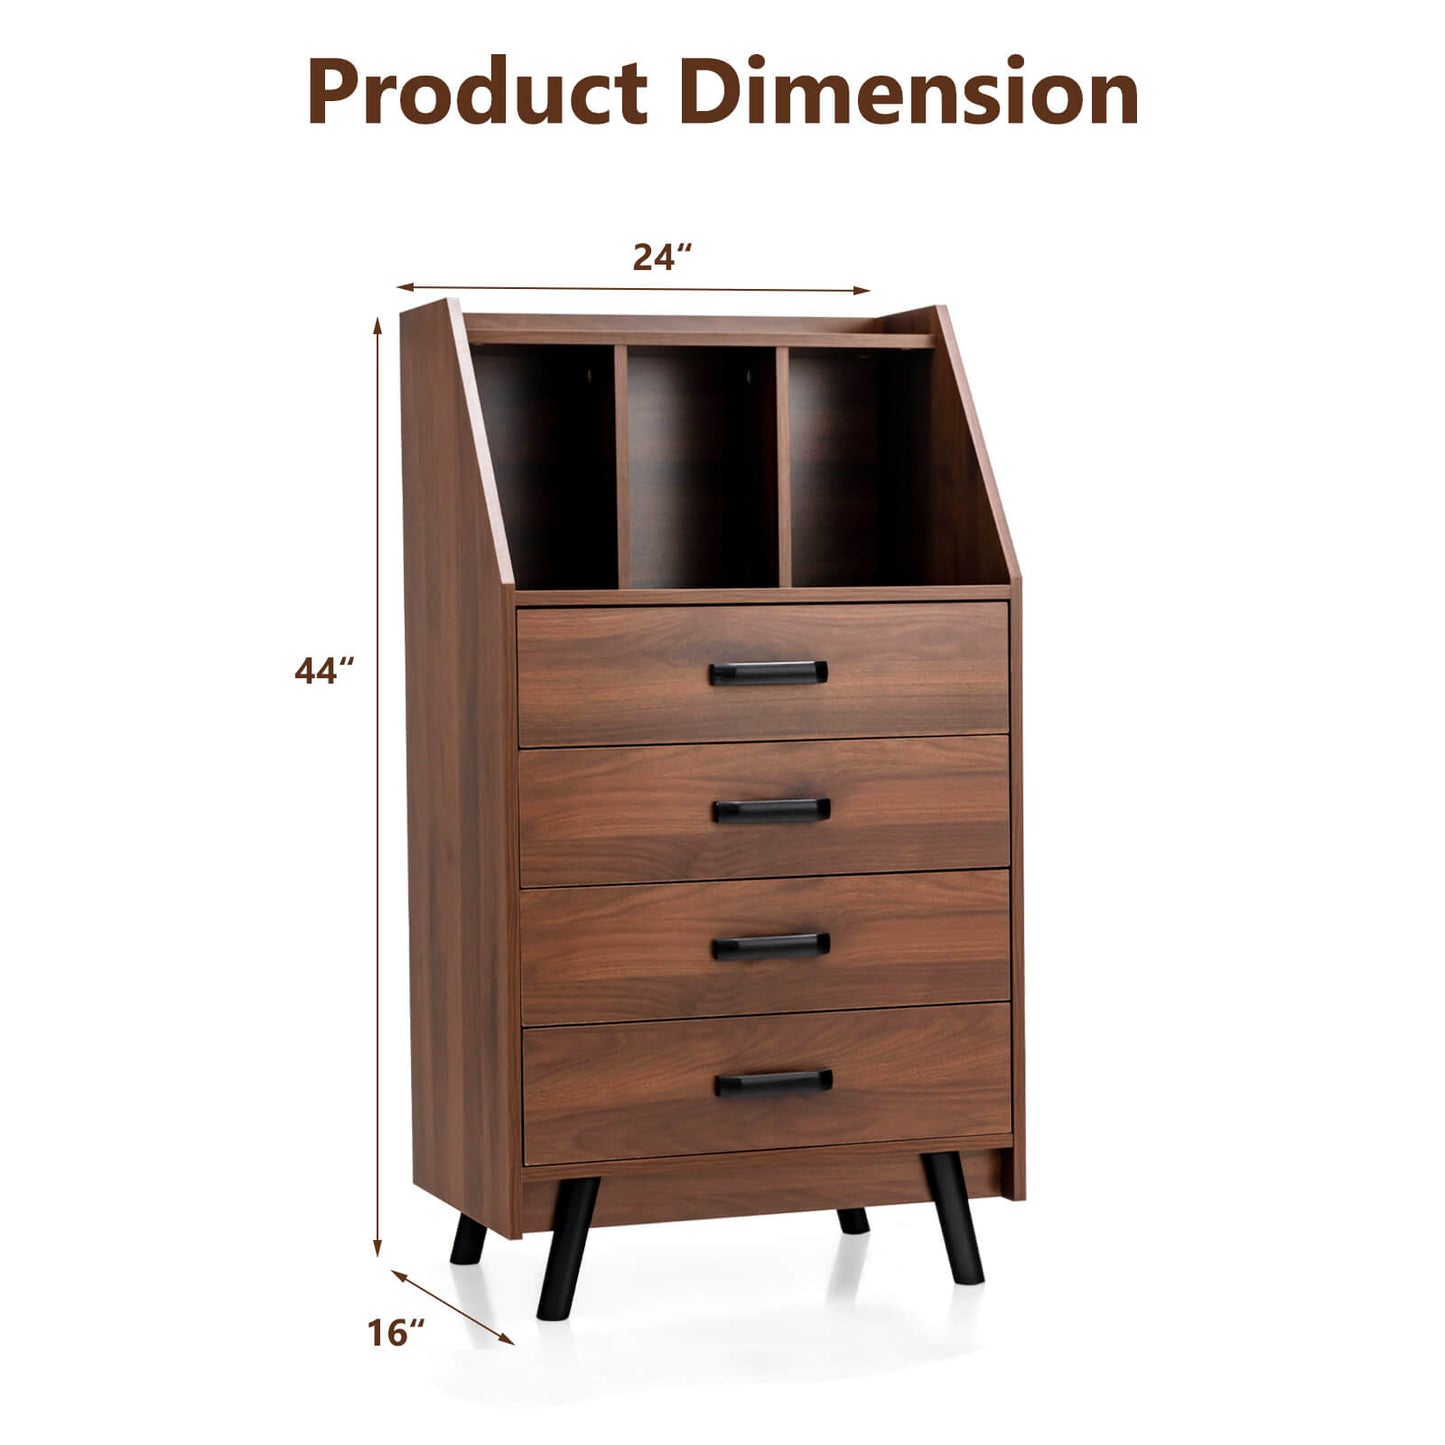 4-Drawer Dresser with 2 Anti-Tipping Kits for Bedroom, Walnut